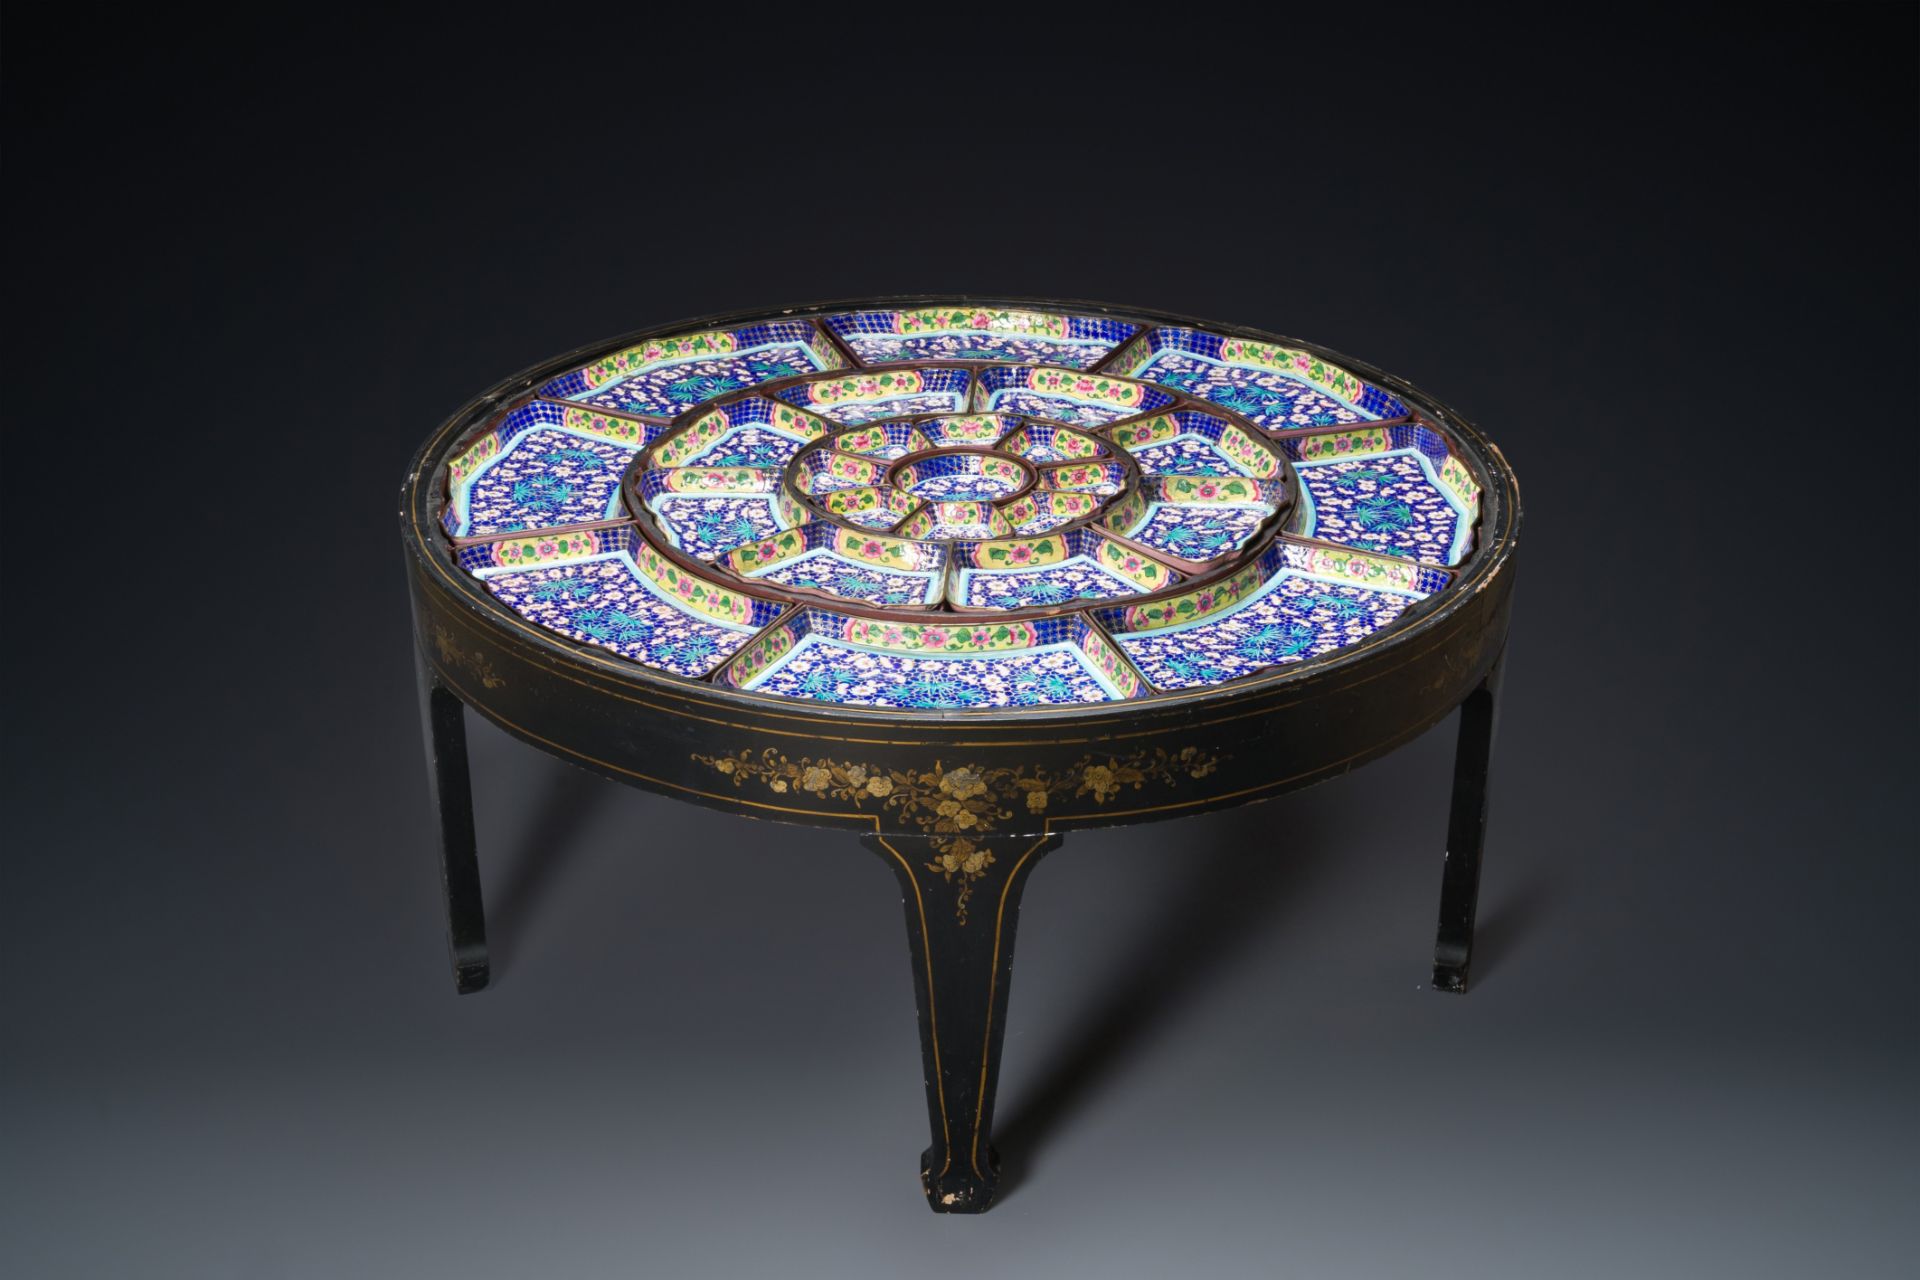 An exceptionally large Chinese Canton enamel rice table or sweetmeat set in its original Canton gilt